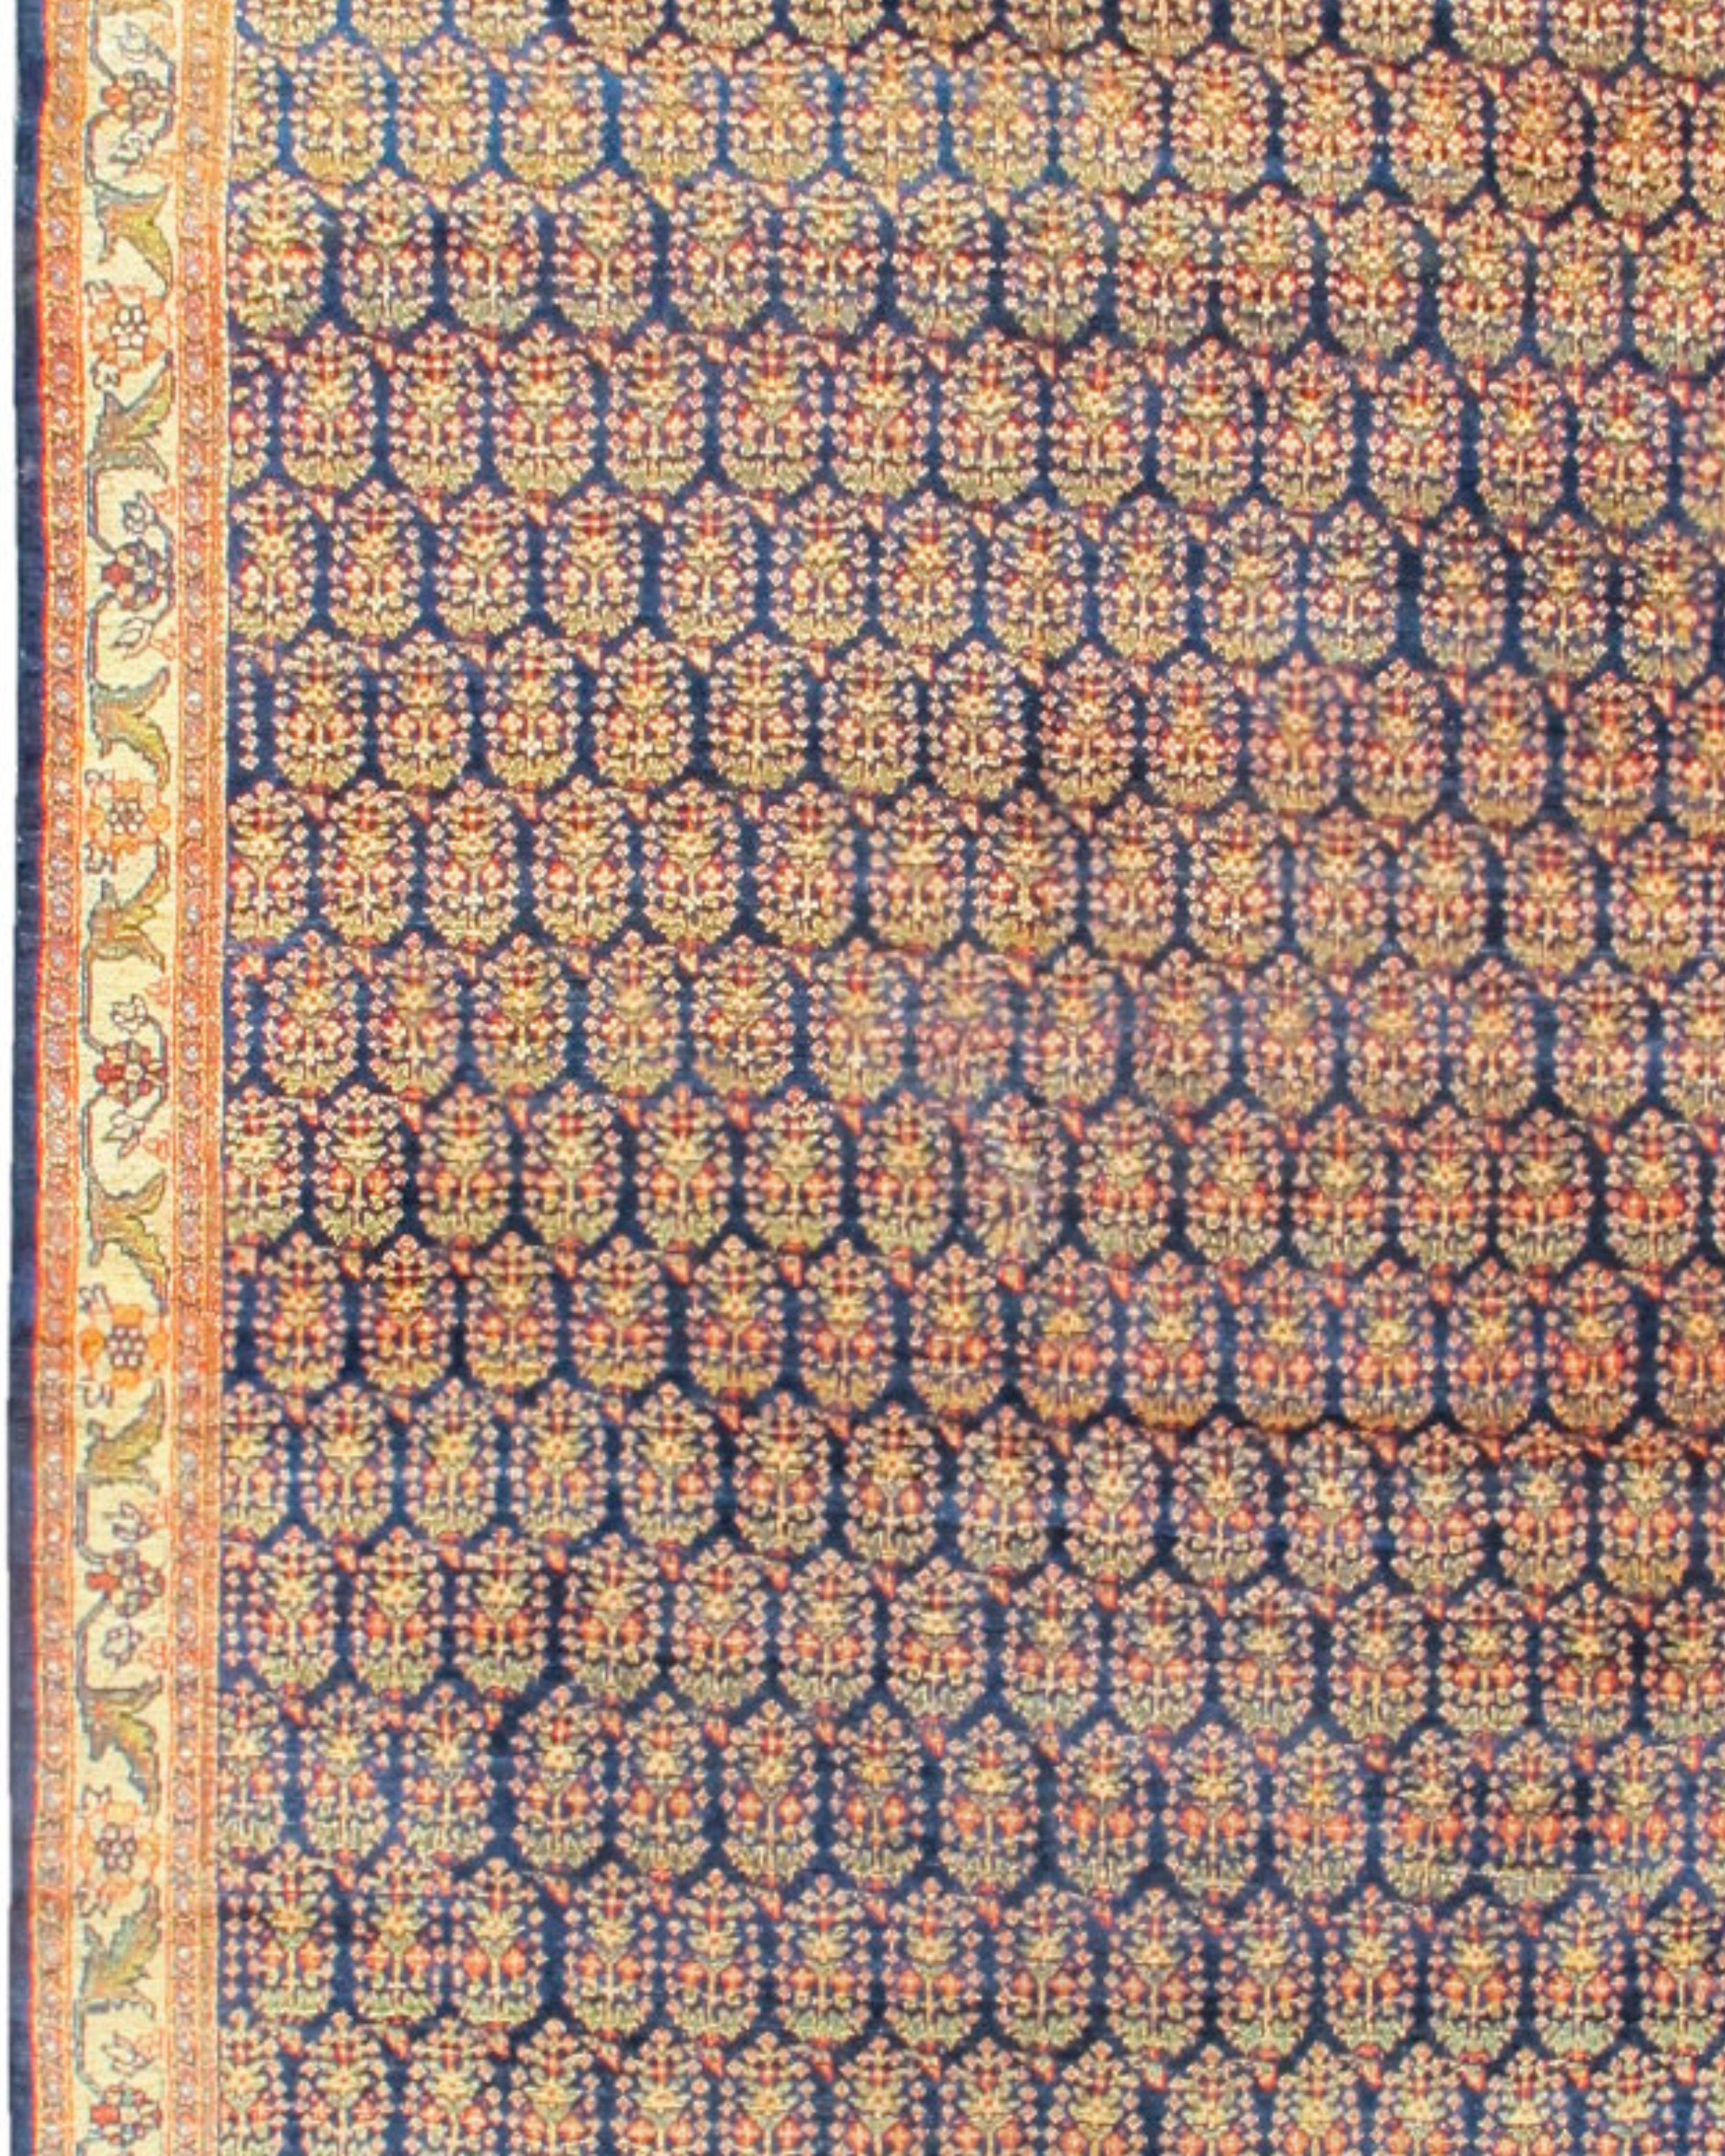 Antique Persian Mahal Gallery Carpet, Early 20th Century In Excellent Condition For Sale In San Francisco, CA